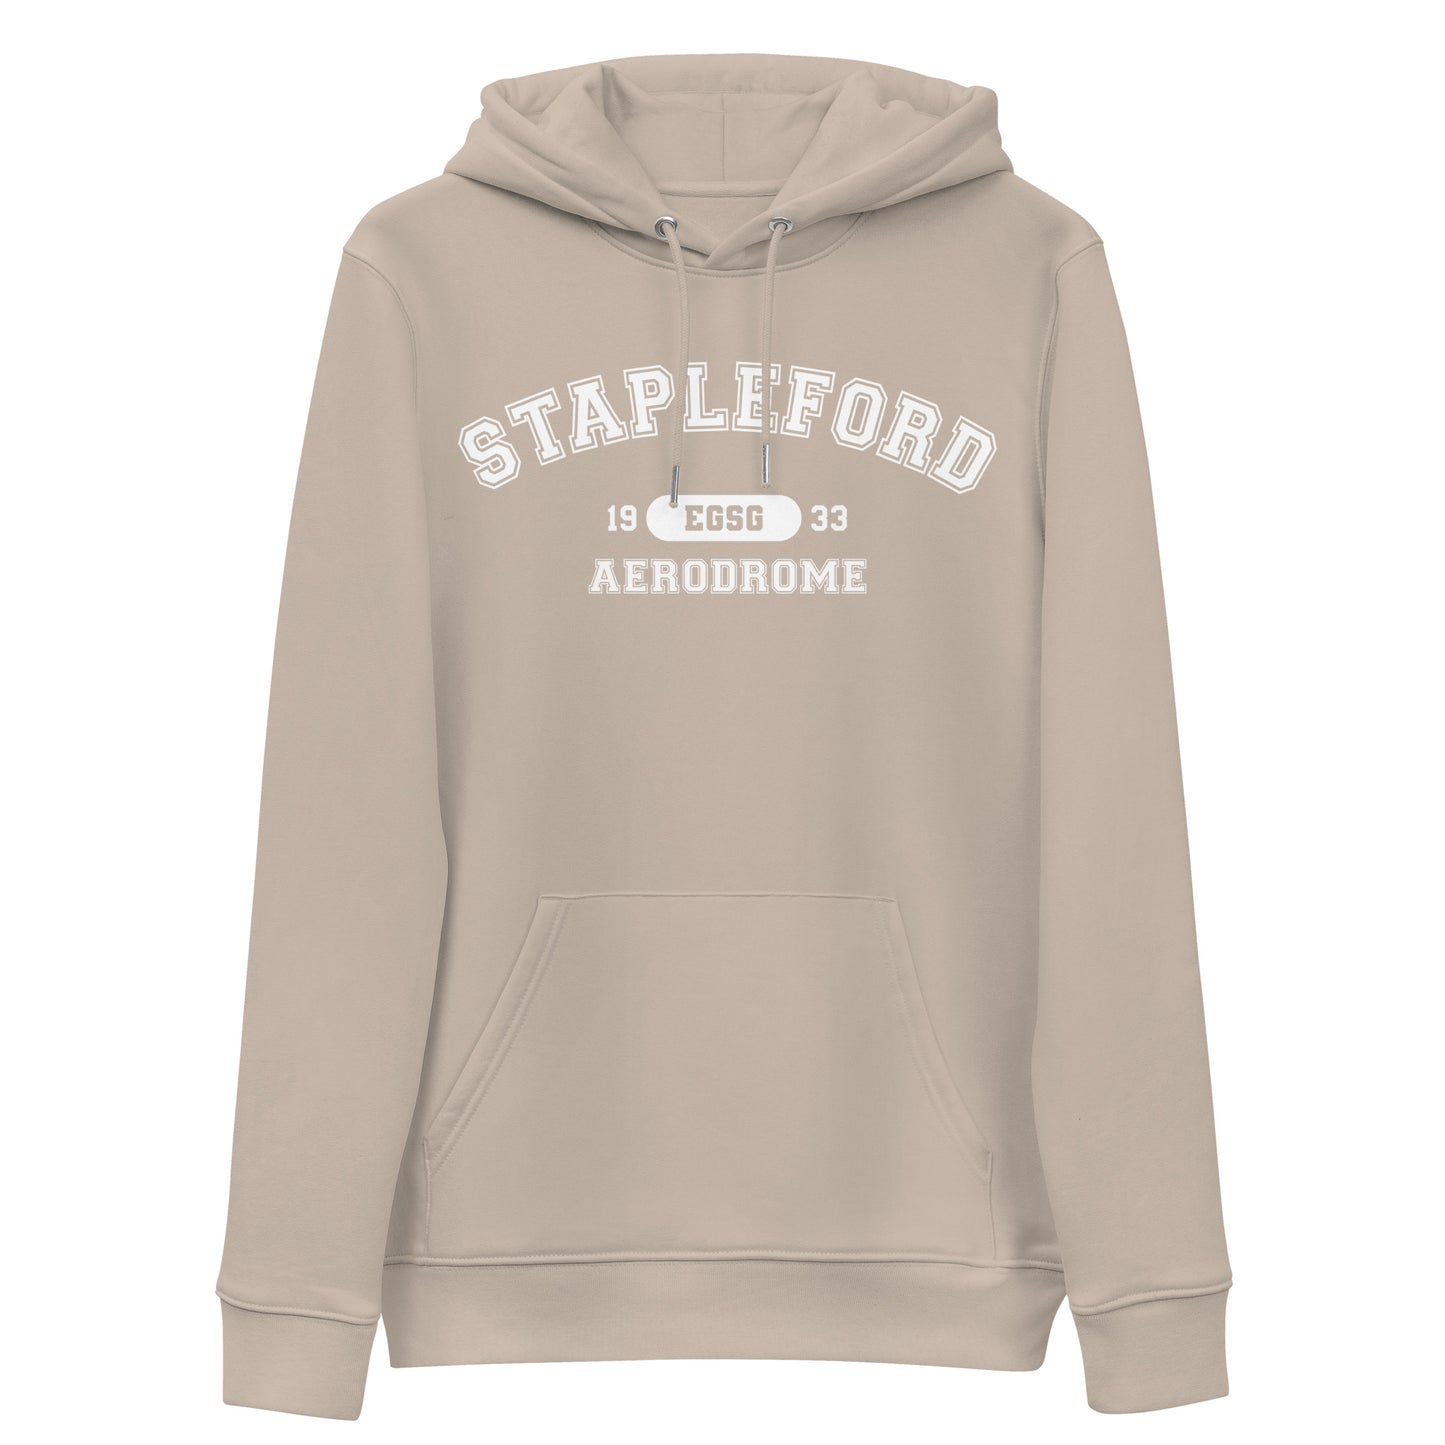 Coloured in a pale sand the Stapleford Aerodrome heavyweight hoodie features a classic collegiate style print with the airport's name, ICAO code and date of construction on the front.